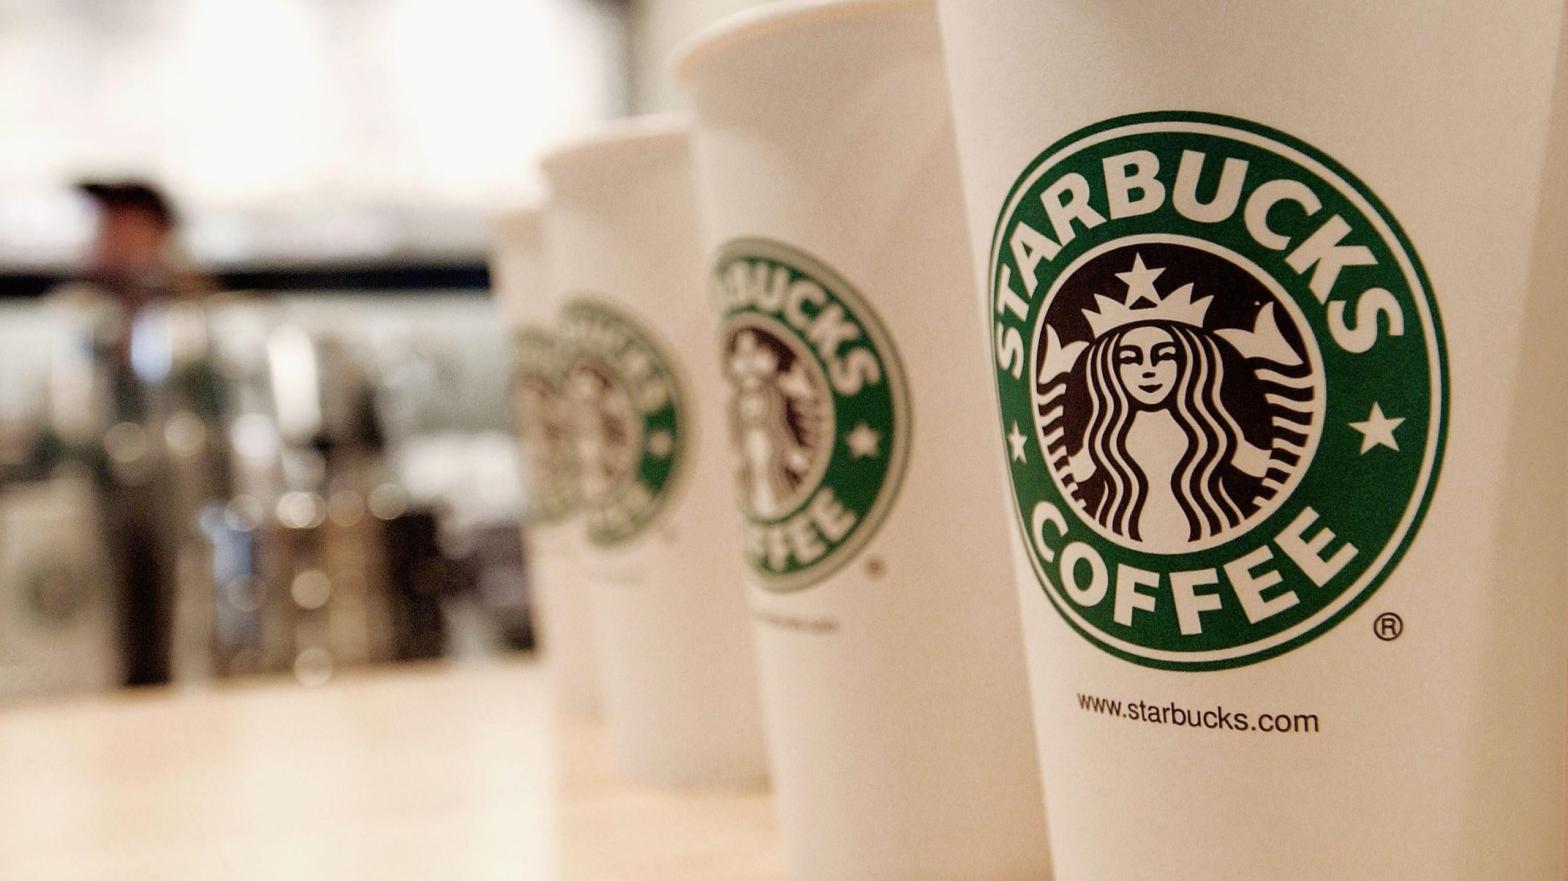 Beverage cups featuring the logo of Starbucks Coffee. (Photo: Stephen Chernin, Getty Images)